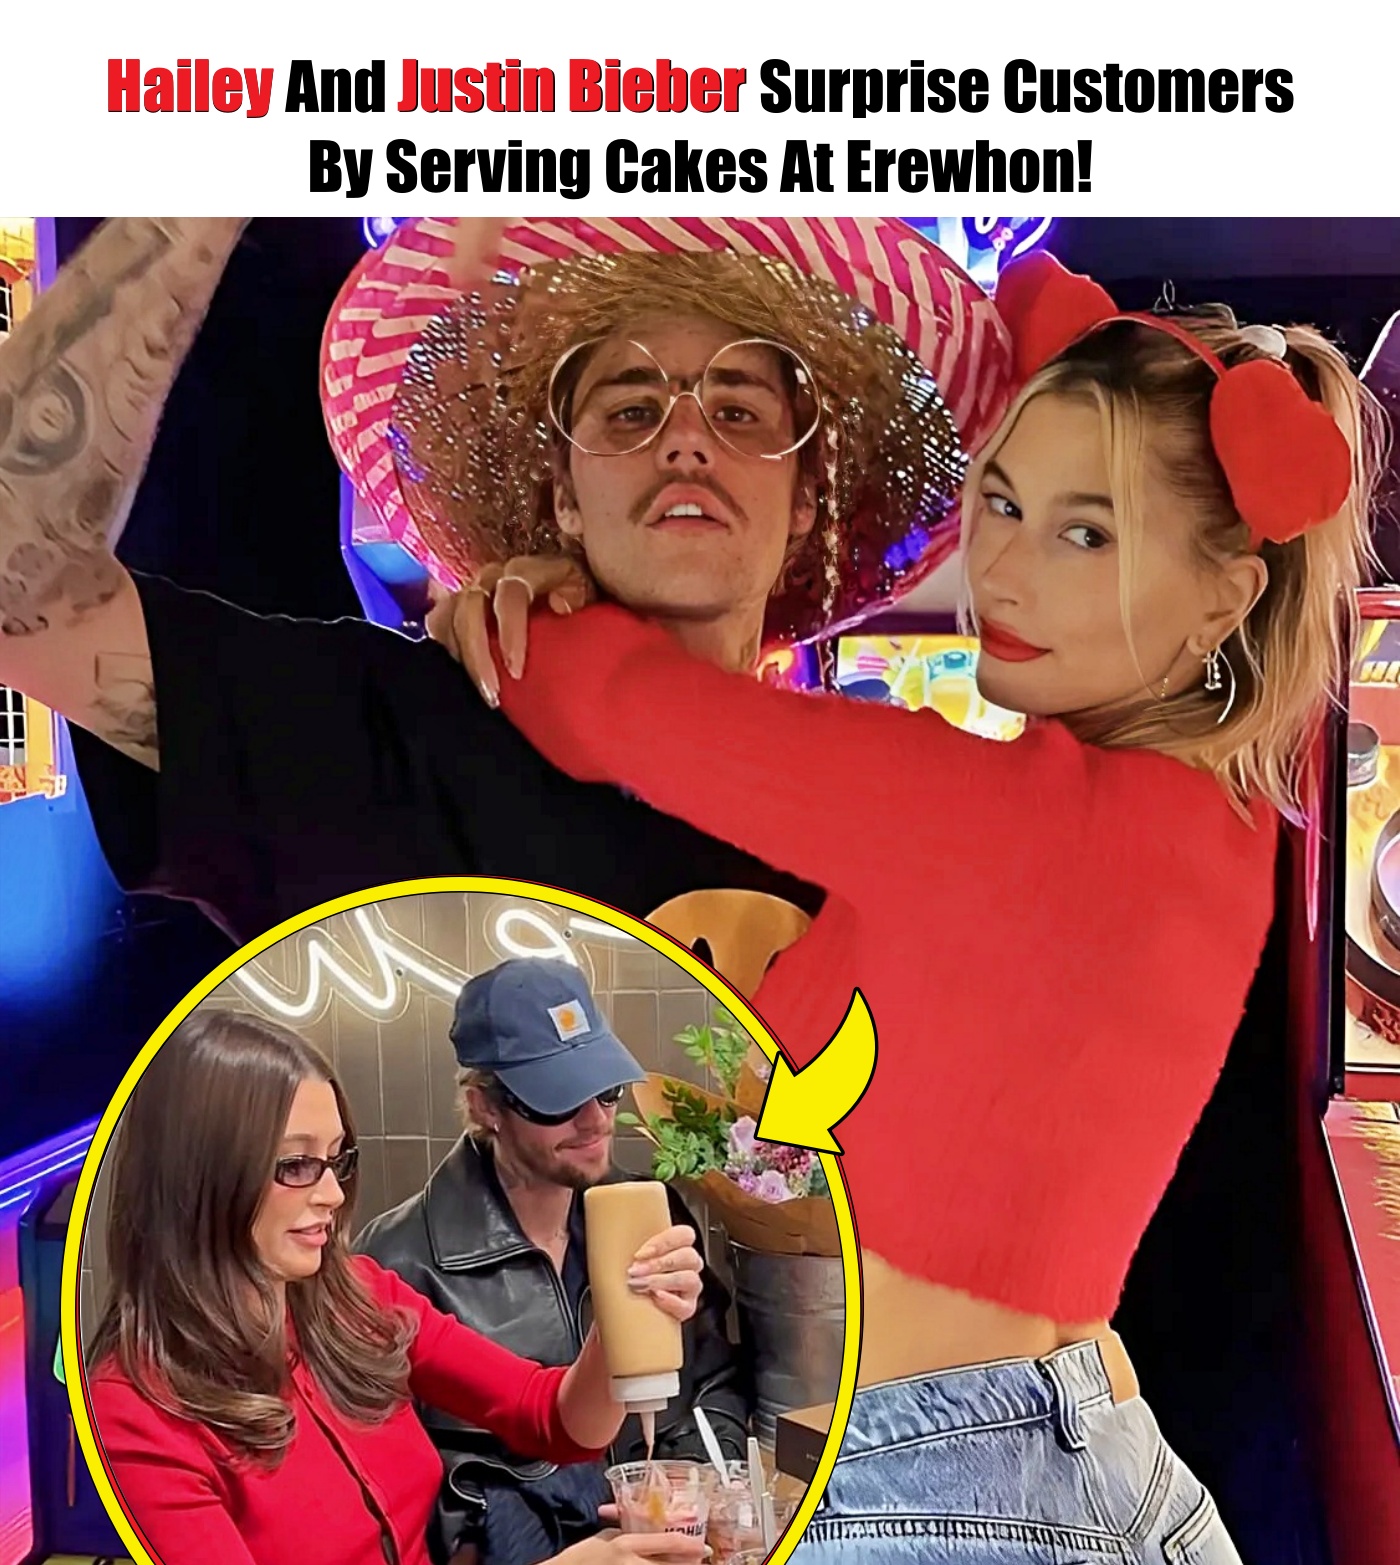 Hailey And Justin Bieber Surprise Customers By Serving Cakes At Erewhon!